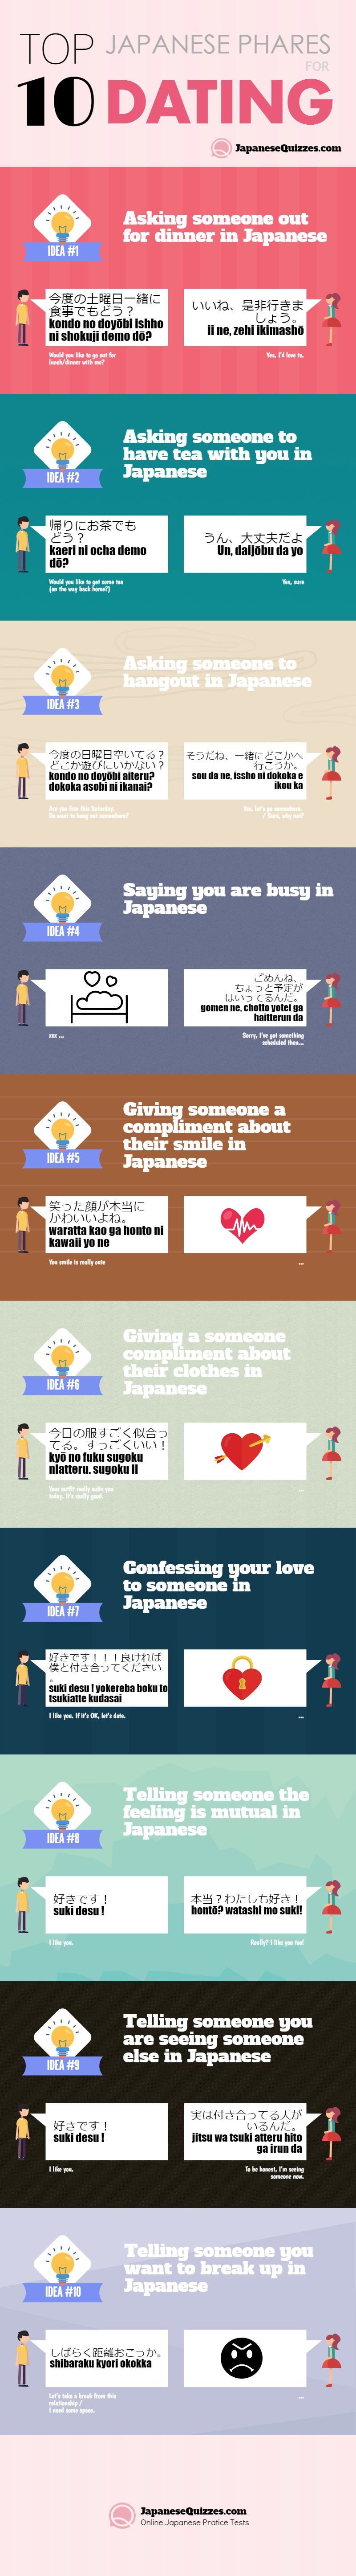 10 JP Phrases for Dating